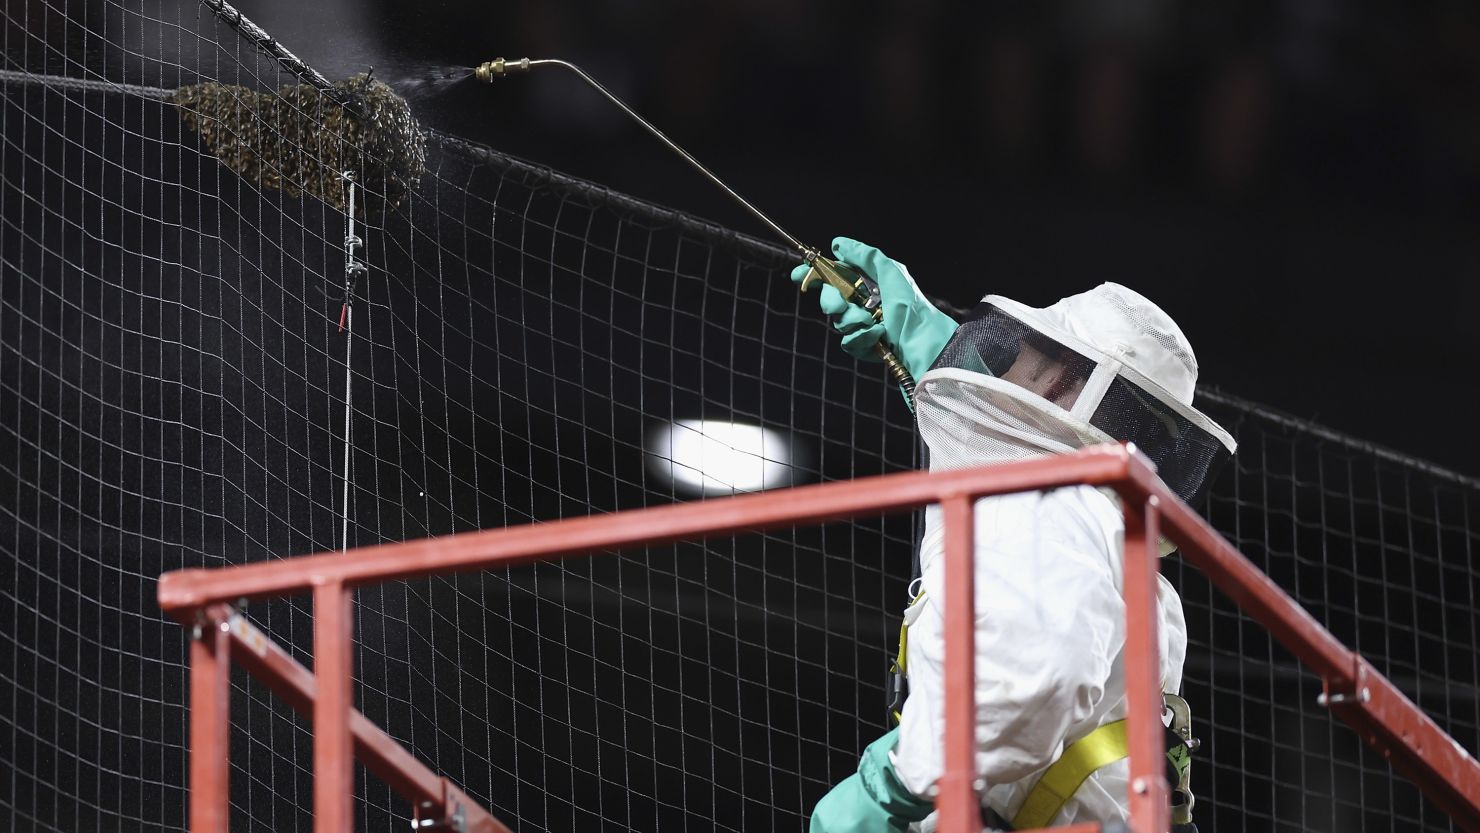 Beekeeper Matt Hilton removed a swarm of bees that formed on the net behind home plate at Chase Field.